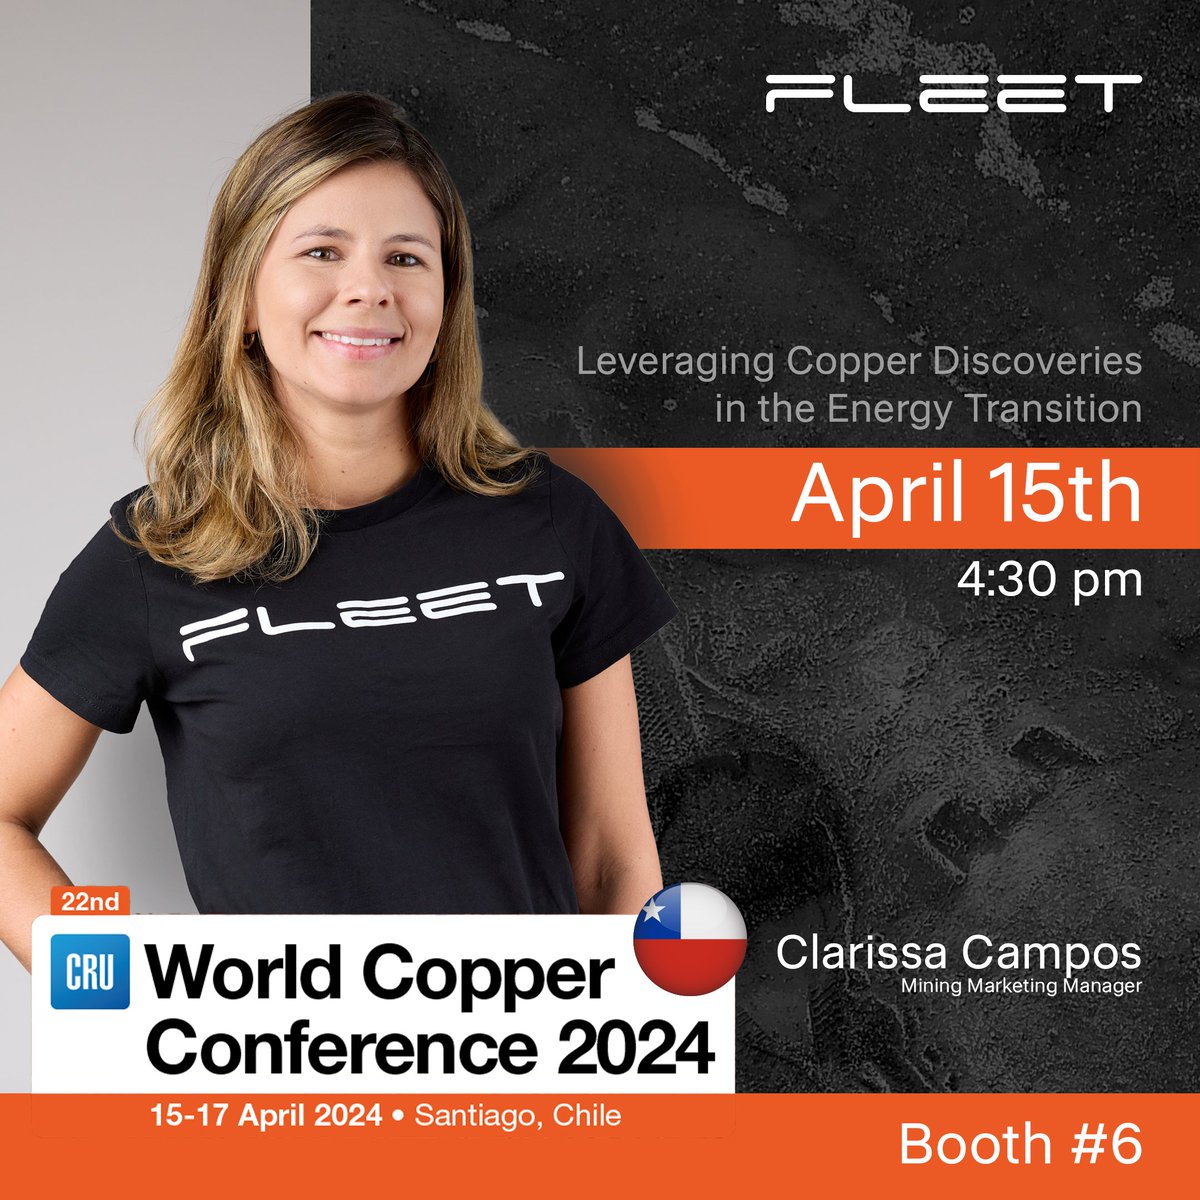 Fleet Space will be at the #WorldCopperConference during #CESCOWeek next week. 🚀 Join us for a special presentation by Clarissa Campos, our Mining Marketing Manager, on Leveraging Copper Discoveries in the Energy Transition, April 15th at 4:30 pm. See you there!